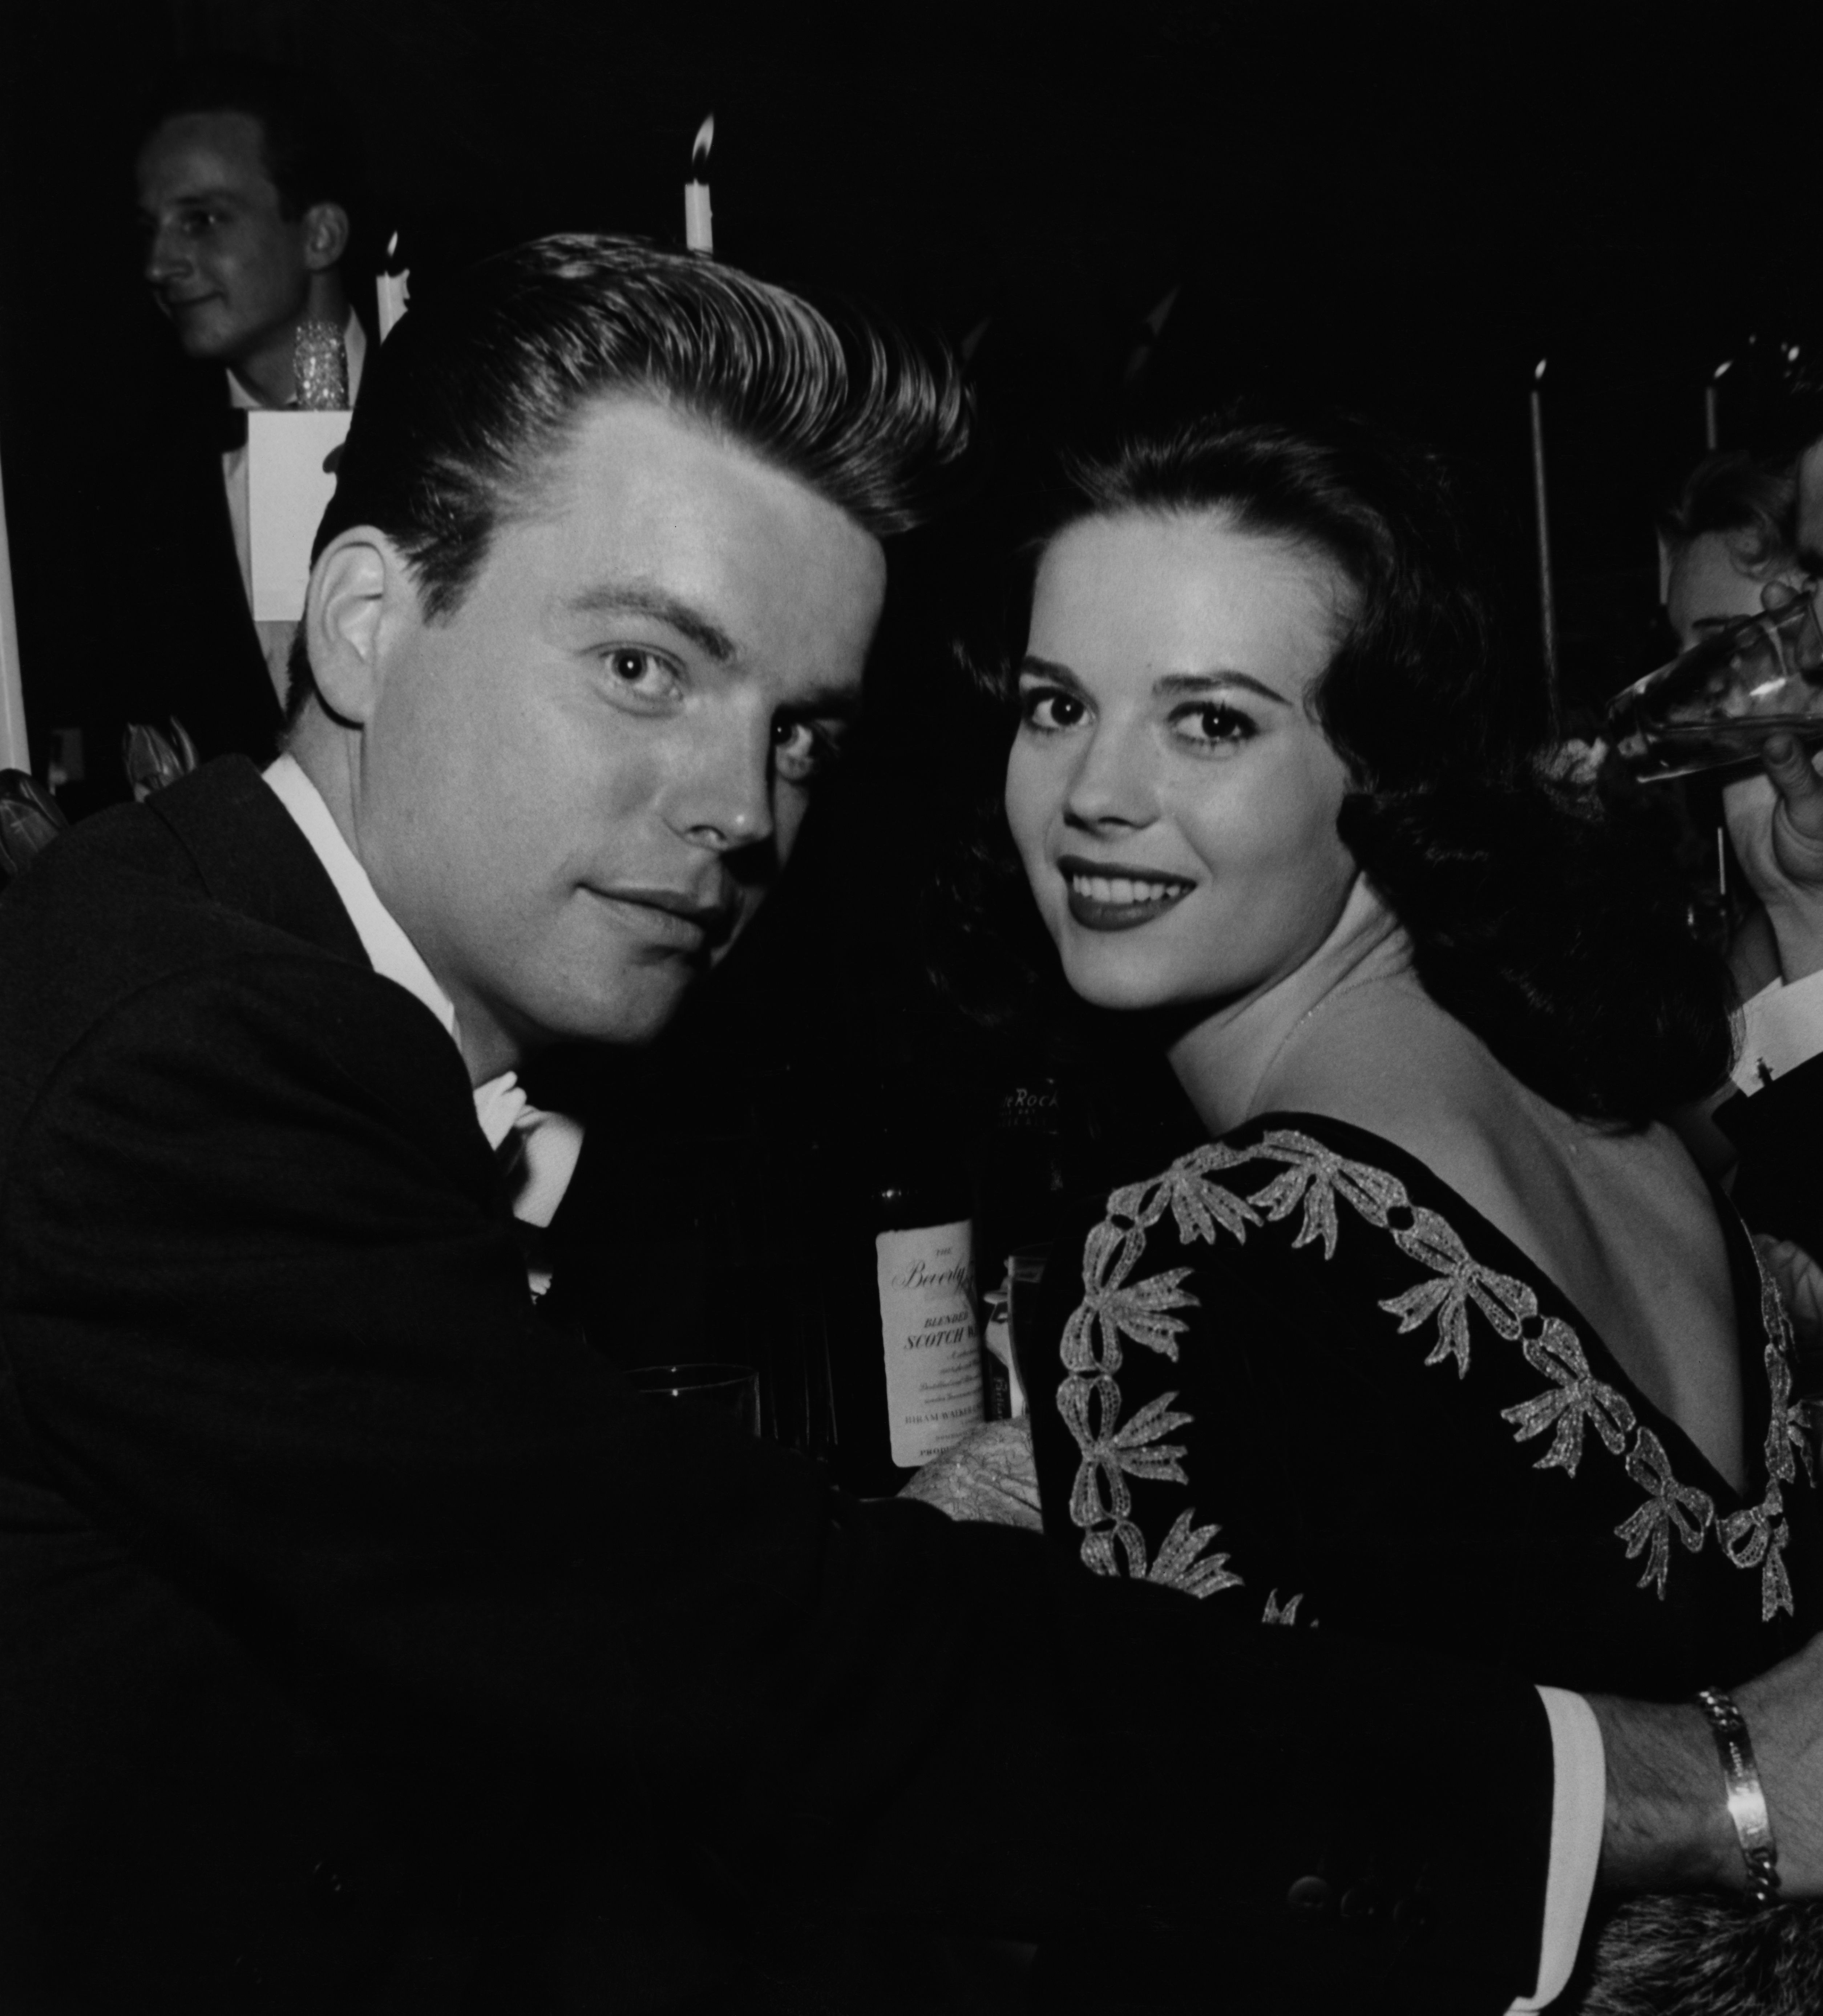 brent bacon recommends natalie wood ever nude pic